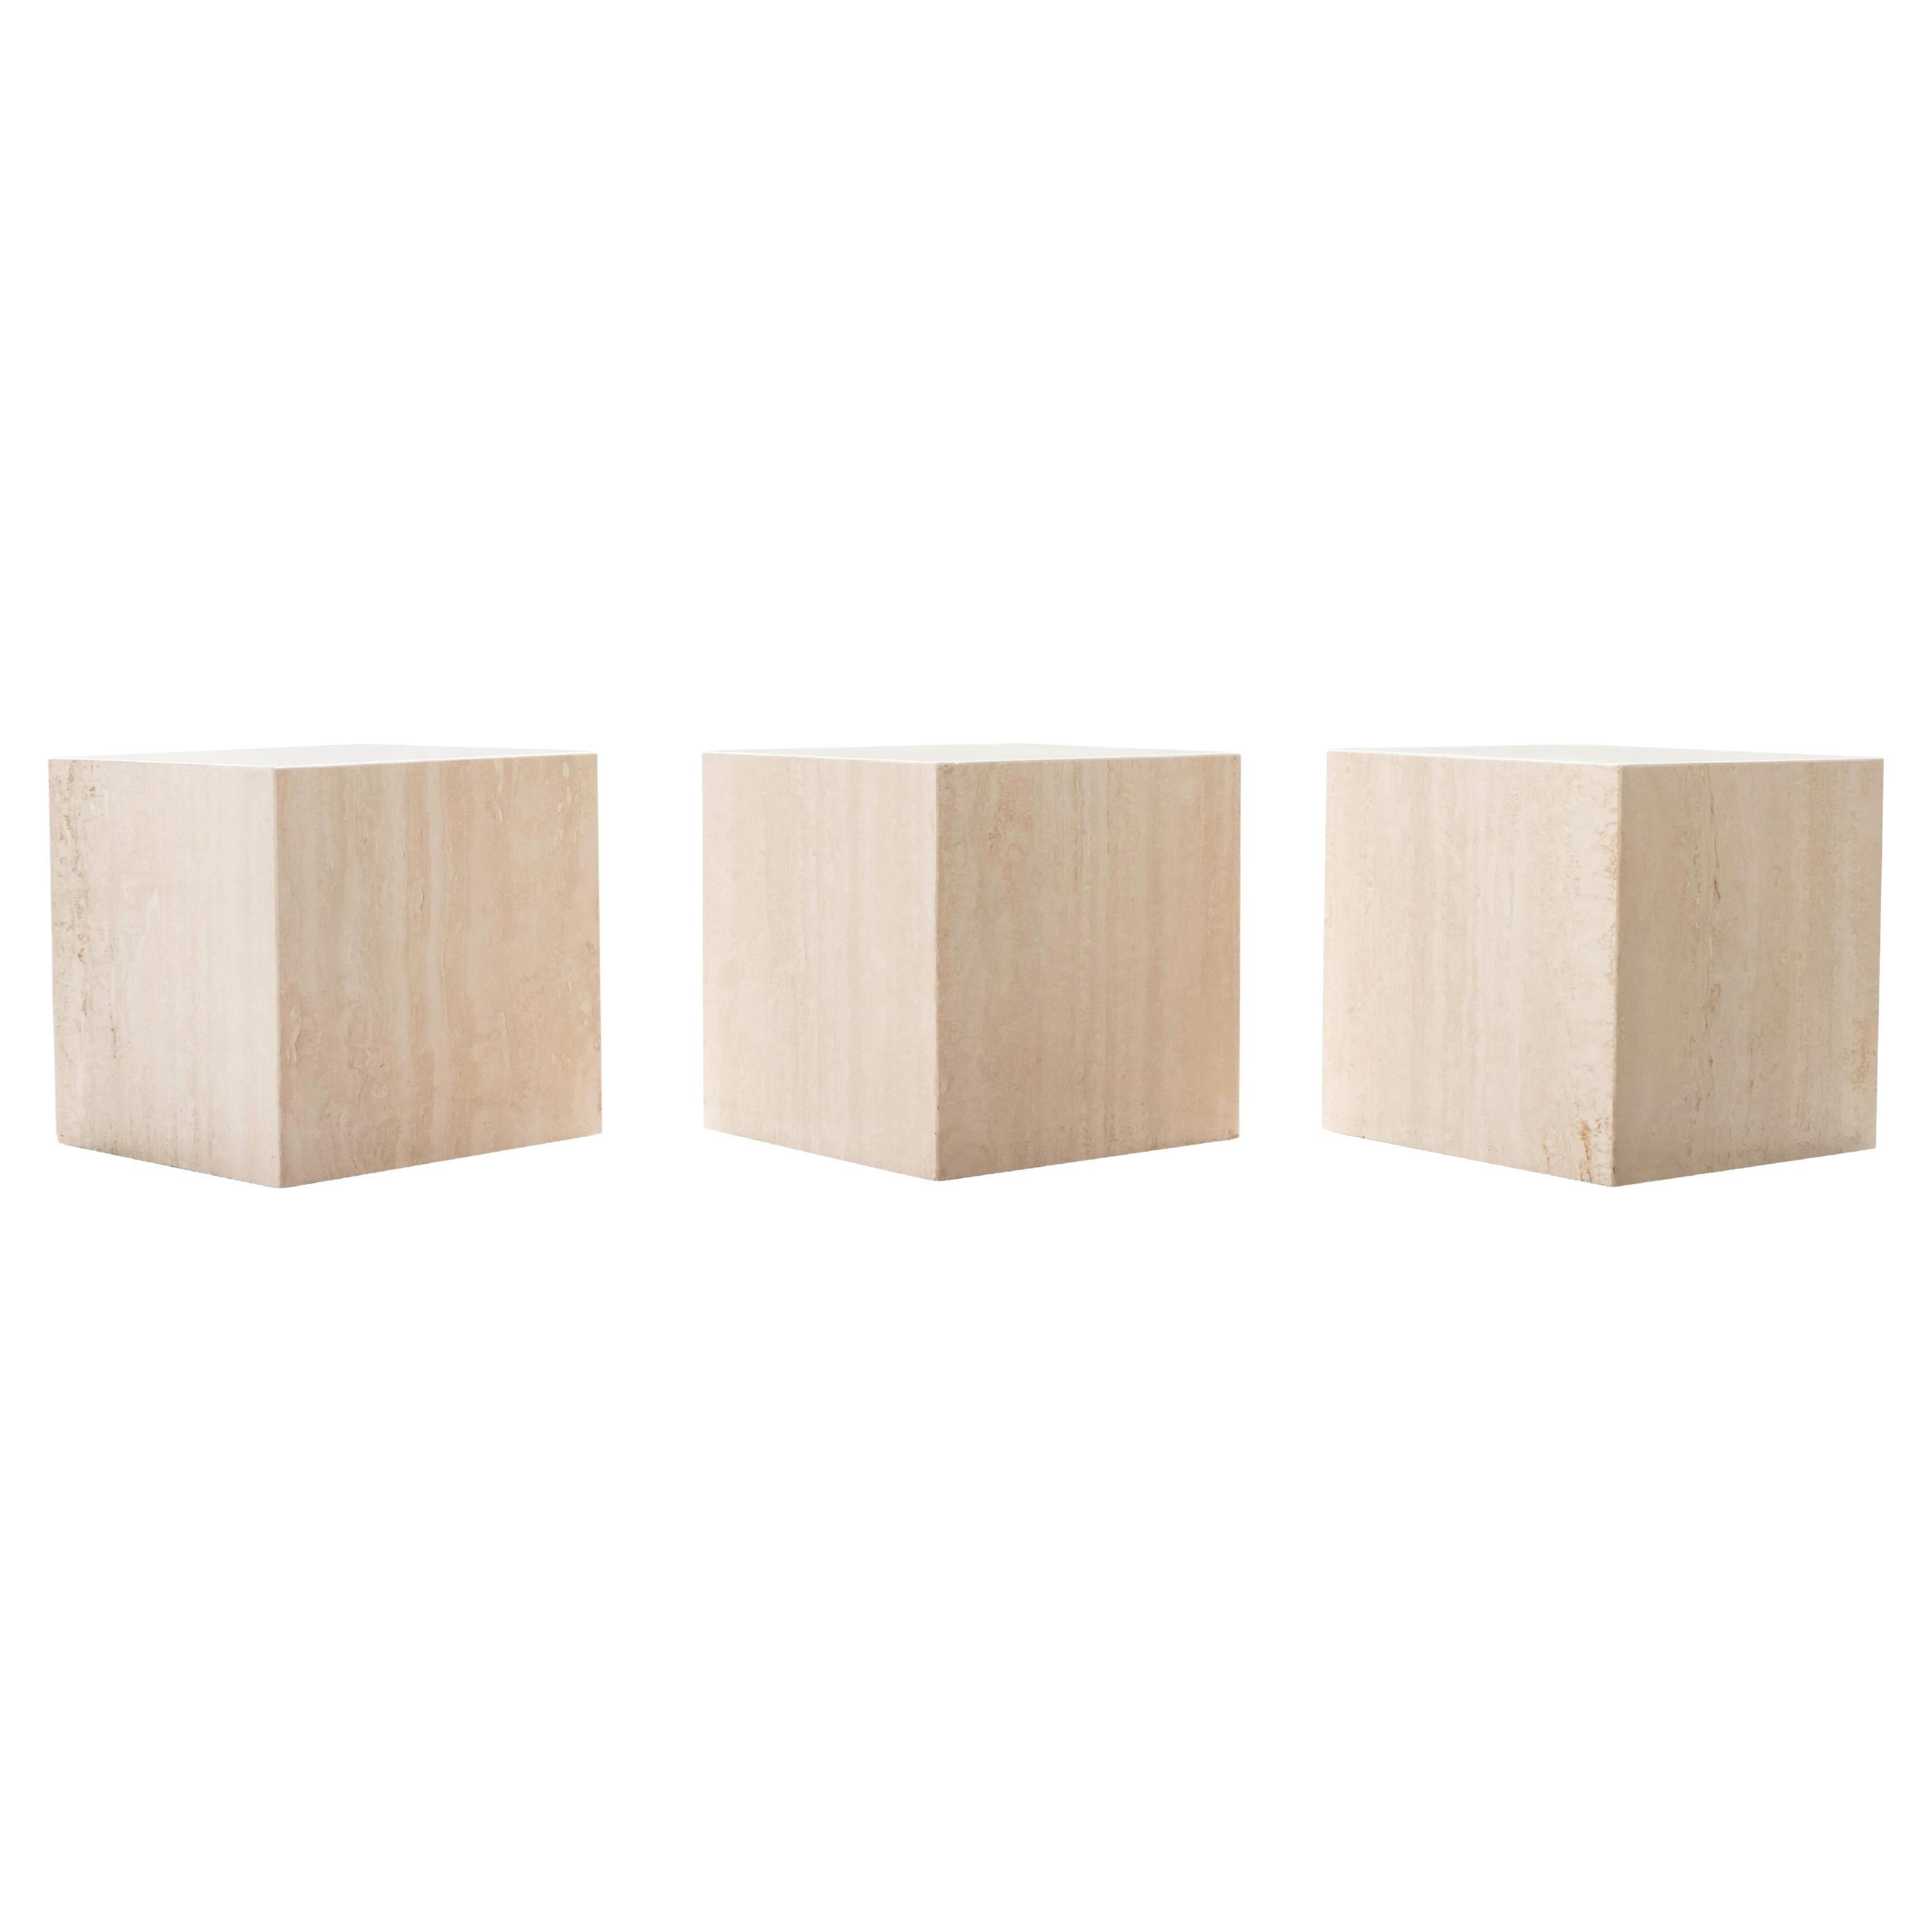 Italian Travertine Set of 3 Cube Shaped Side Tables / Pedestals, Circa 1970's